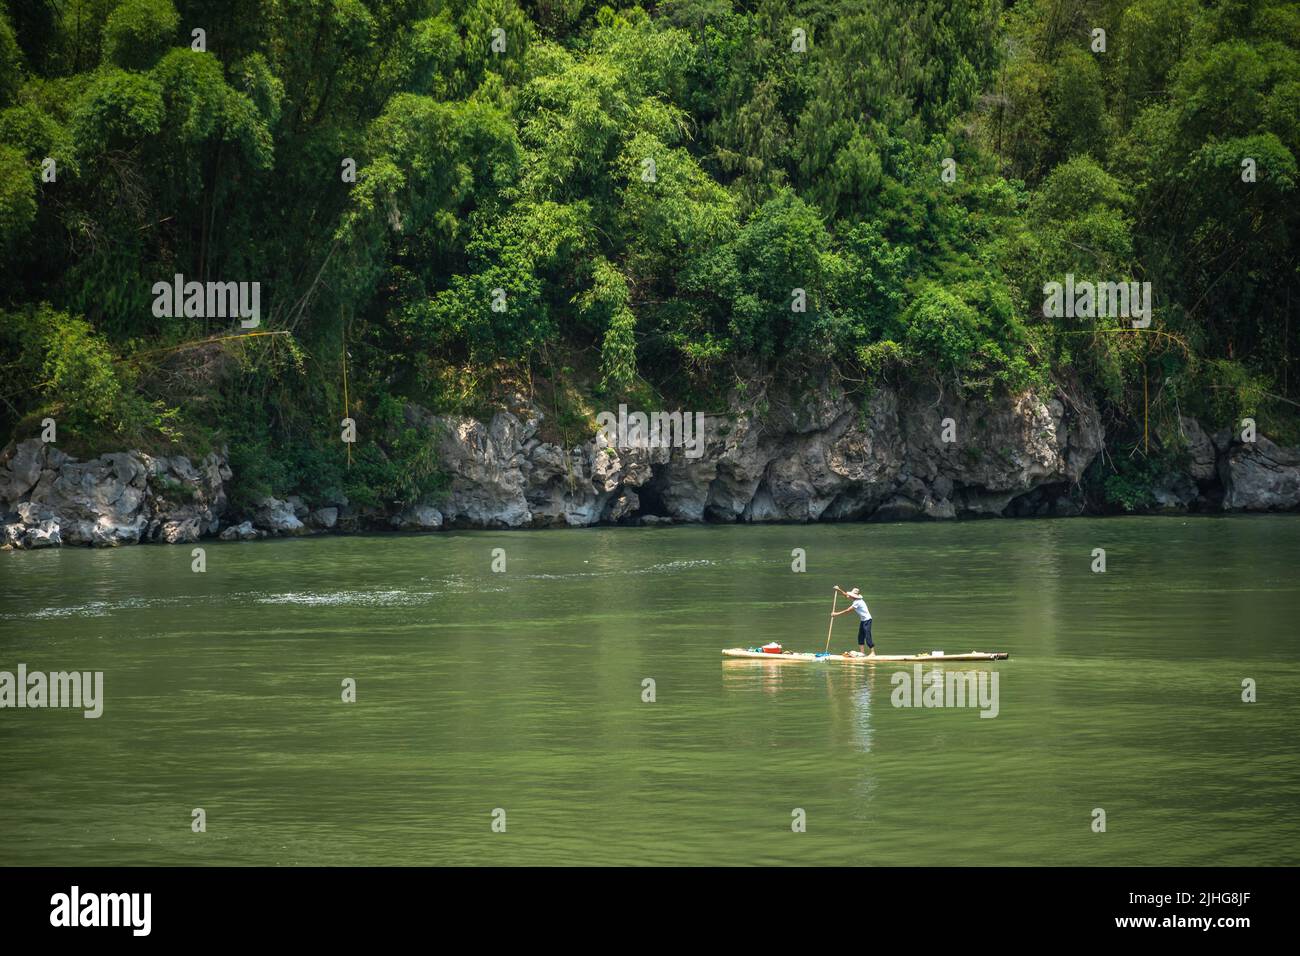 Yangshuo, China - August 2019 : Old fisherman paddling on a small narrow wooden boat among stunning karst mountain scenery on the magnificent Li river Stock Photo